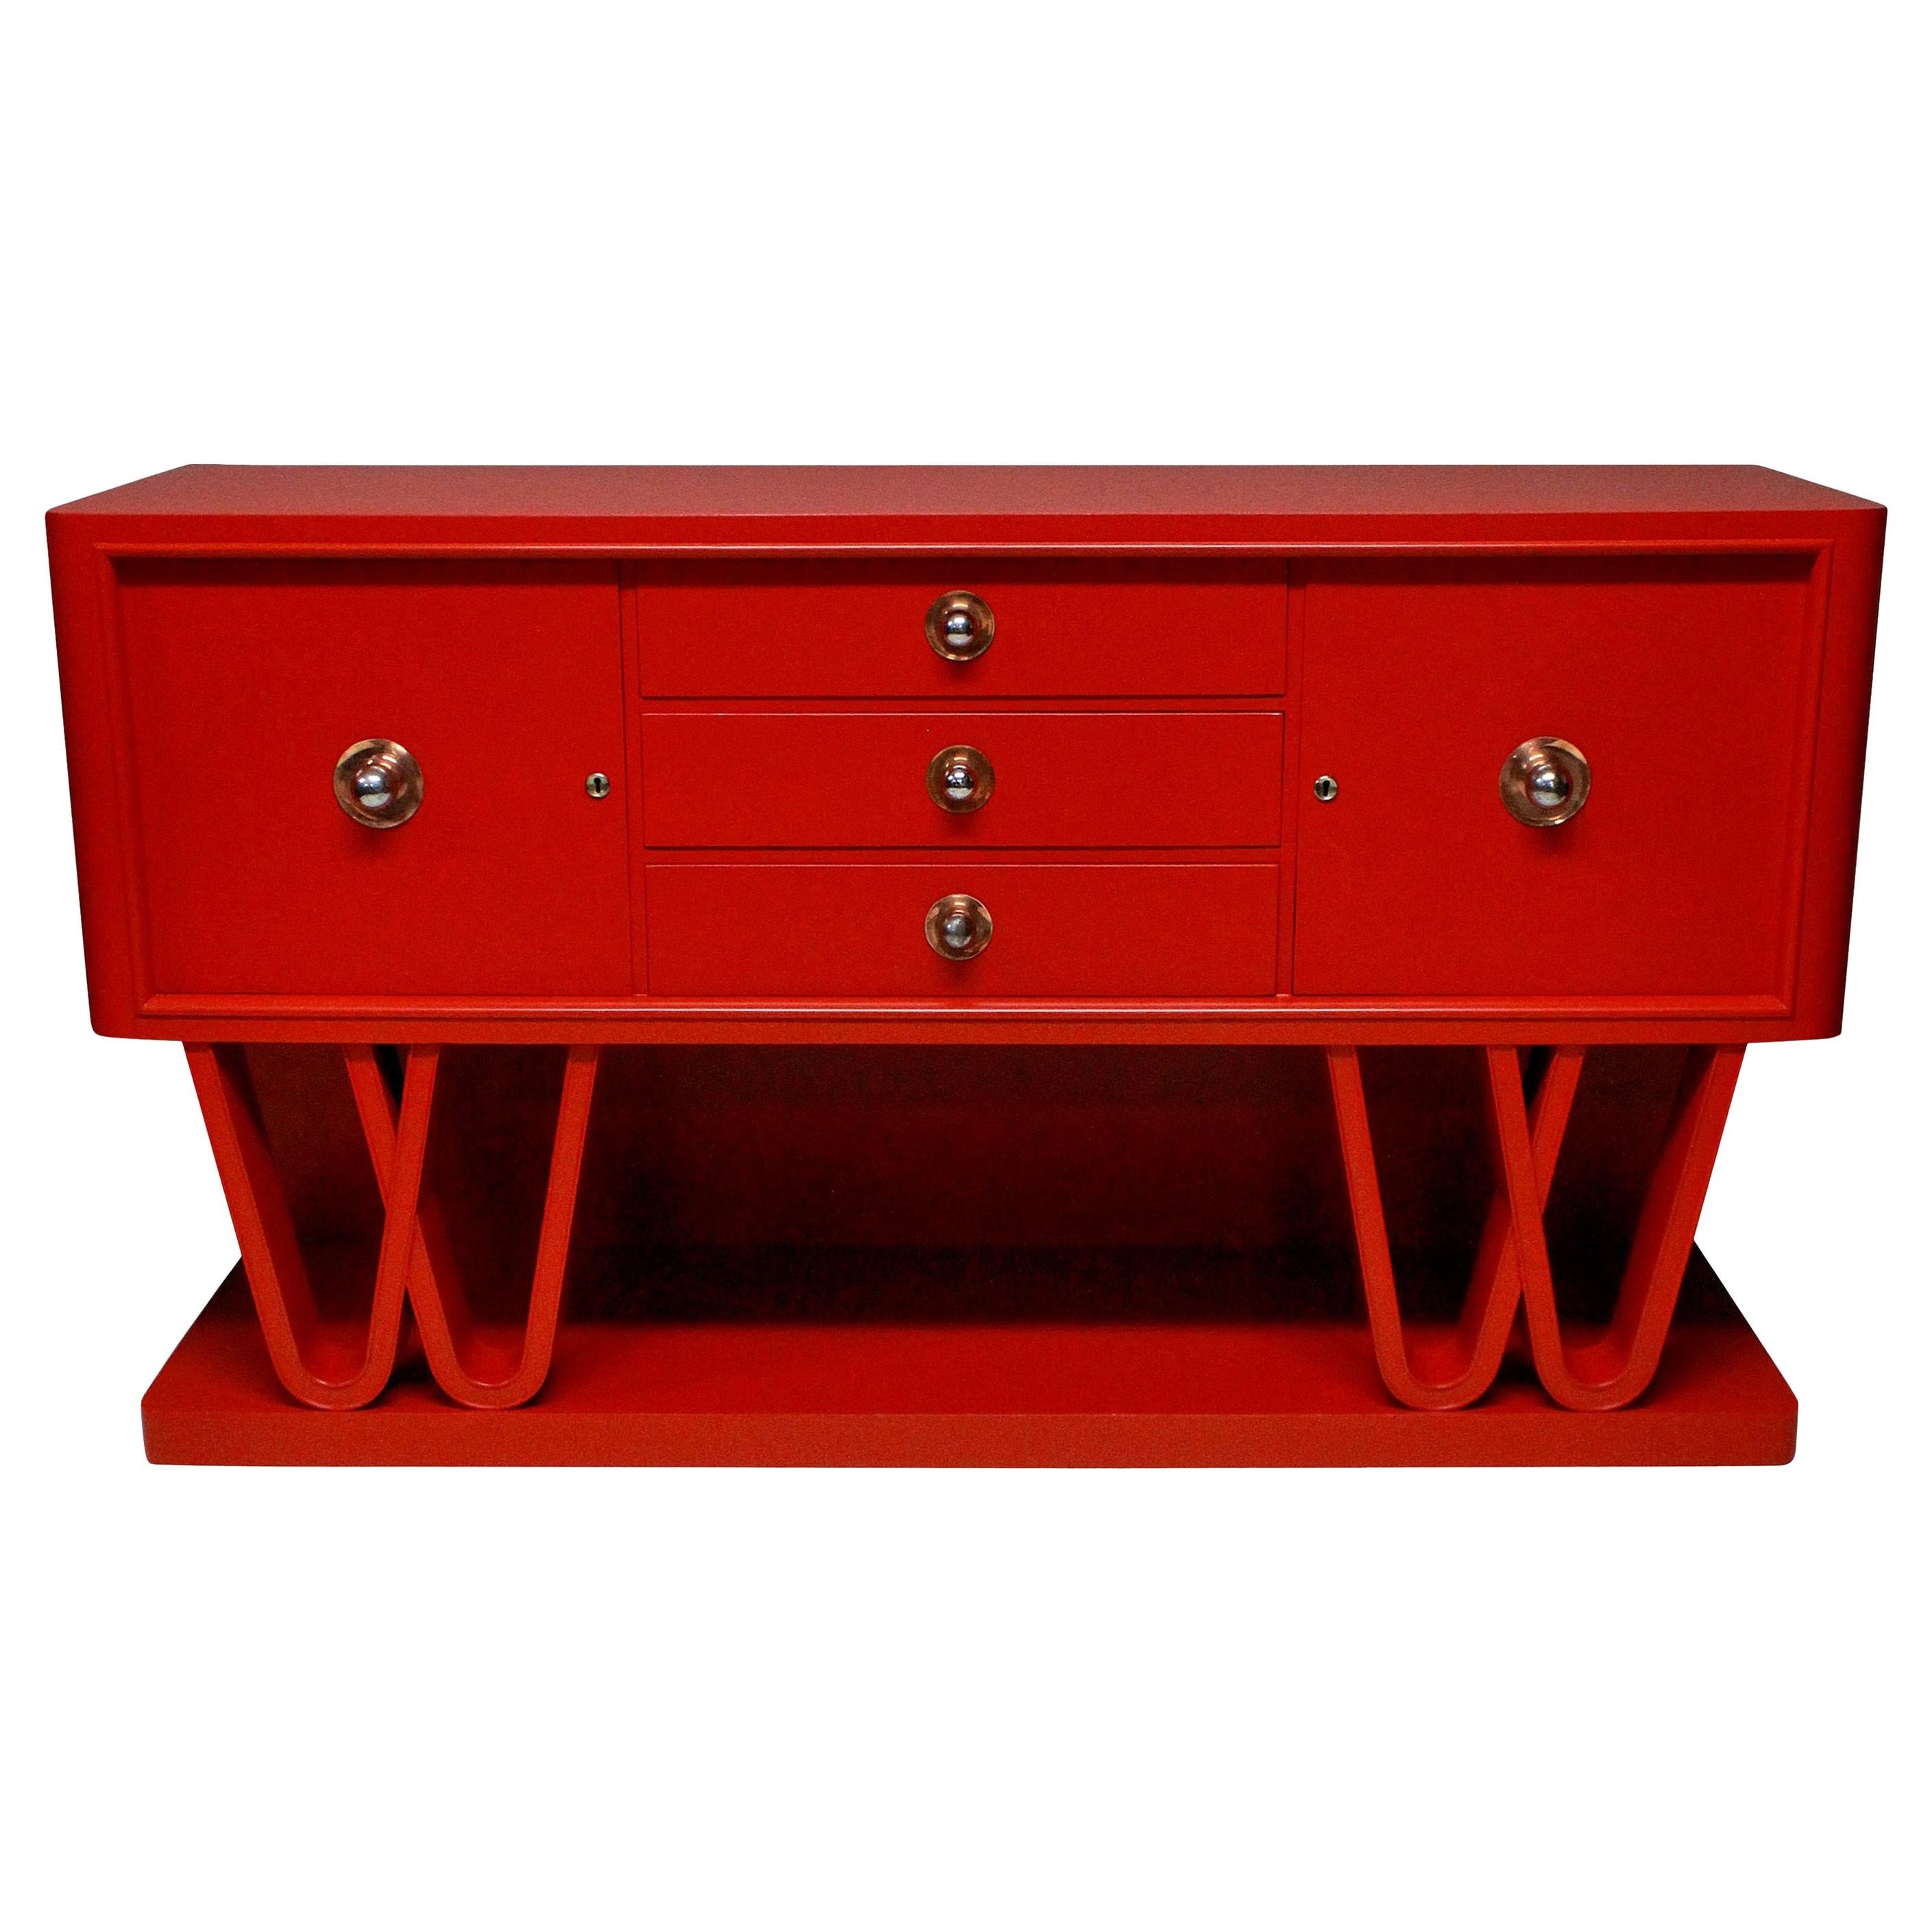 Large Italian Midcentury Red Lacquered Credenza